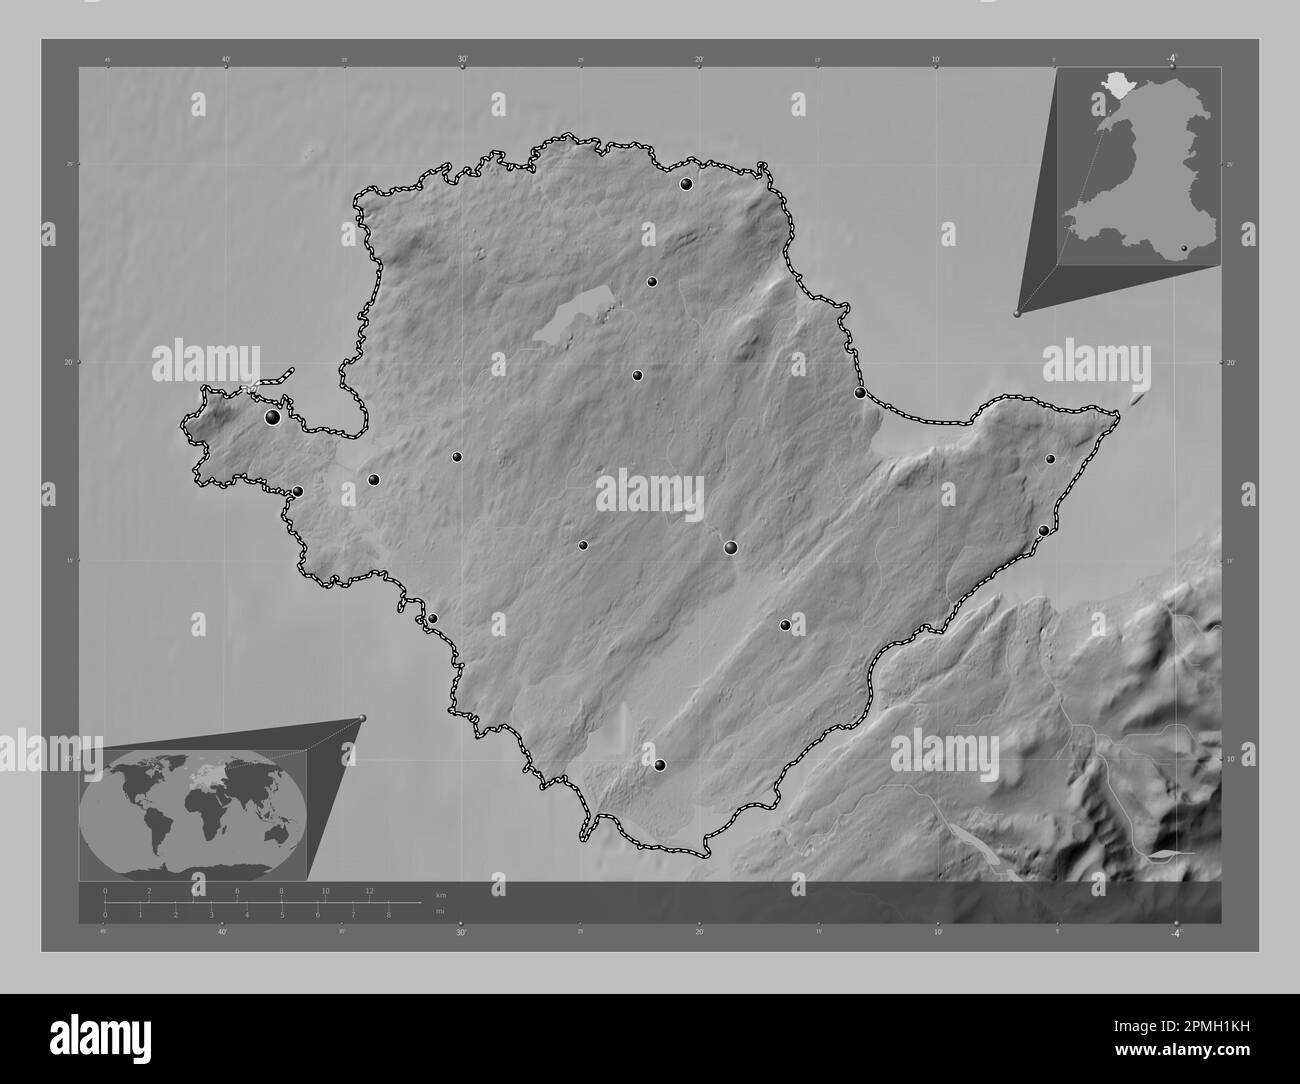 Isle Of Anglesey, region of Wales - Great Britain. Grayscale elevation map with lakes and rivers. Locations of major cities of the region. Corner auxi Stock Photo